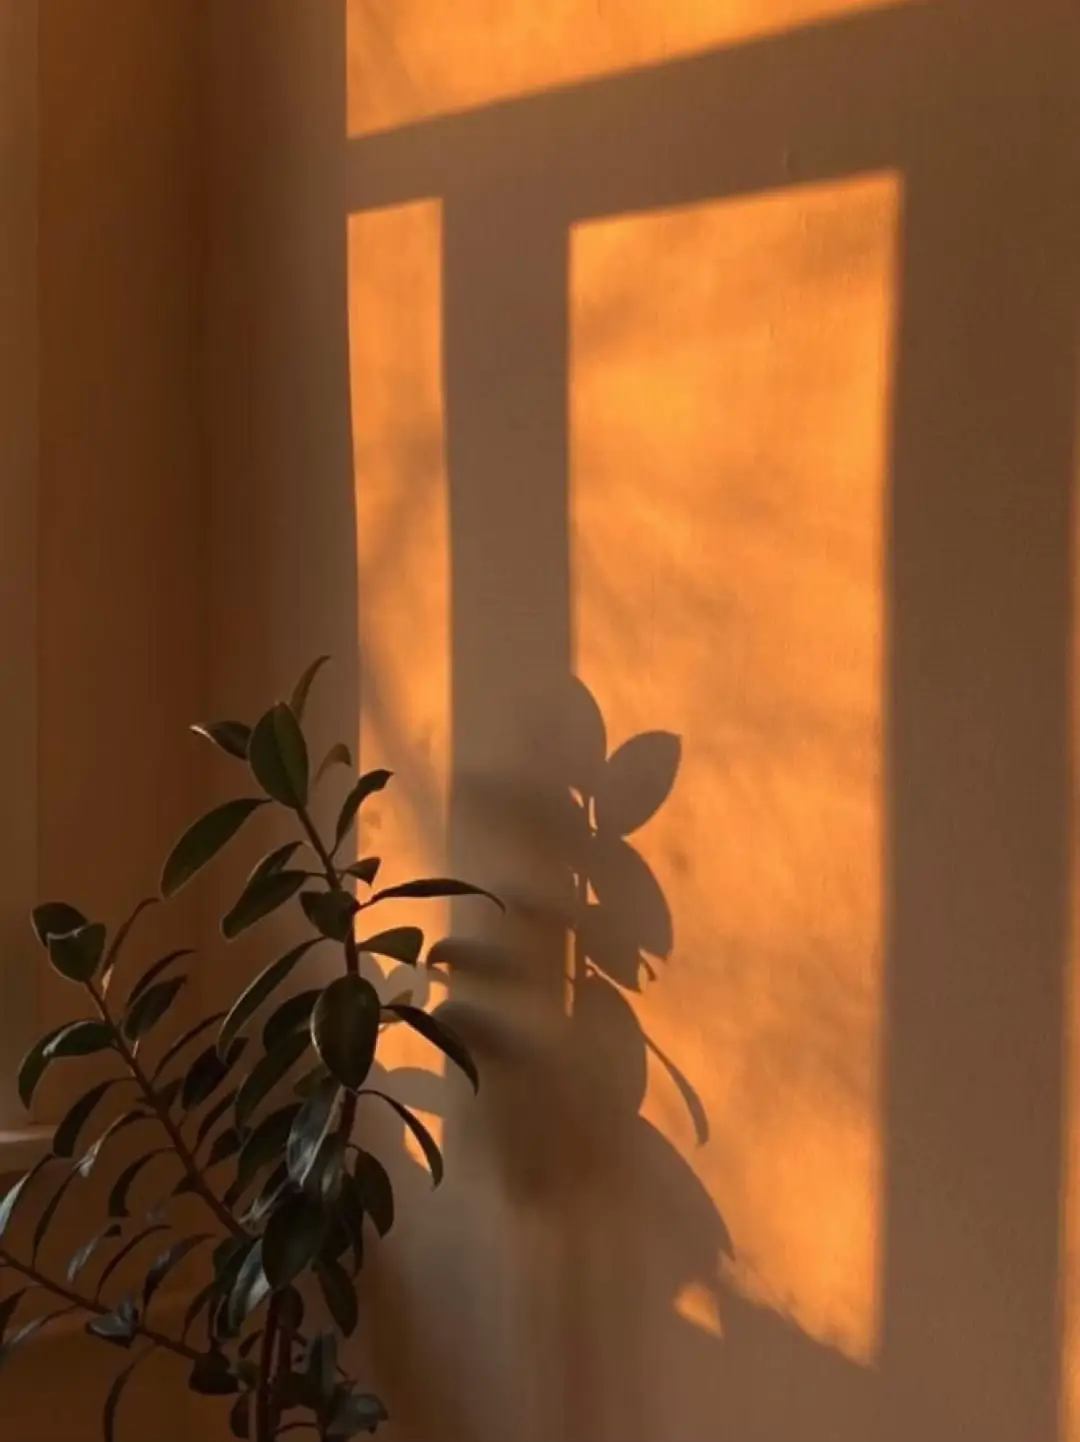  A shadow of a plant is cast on a window sill.